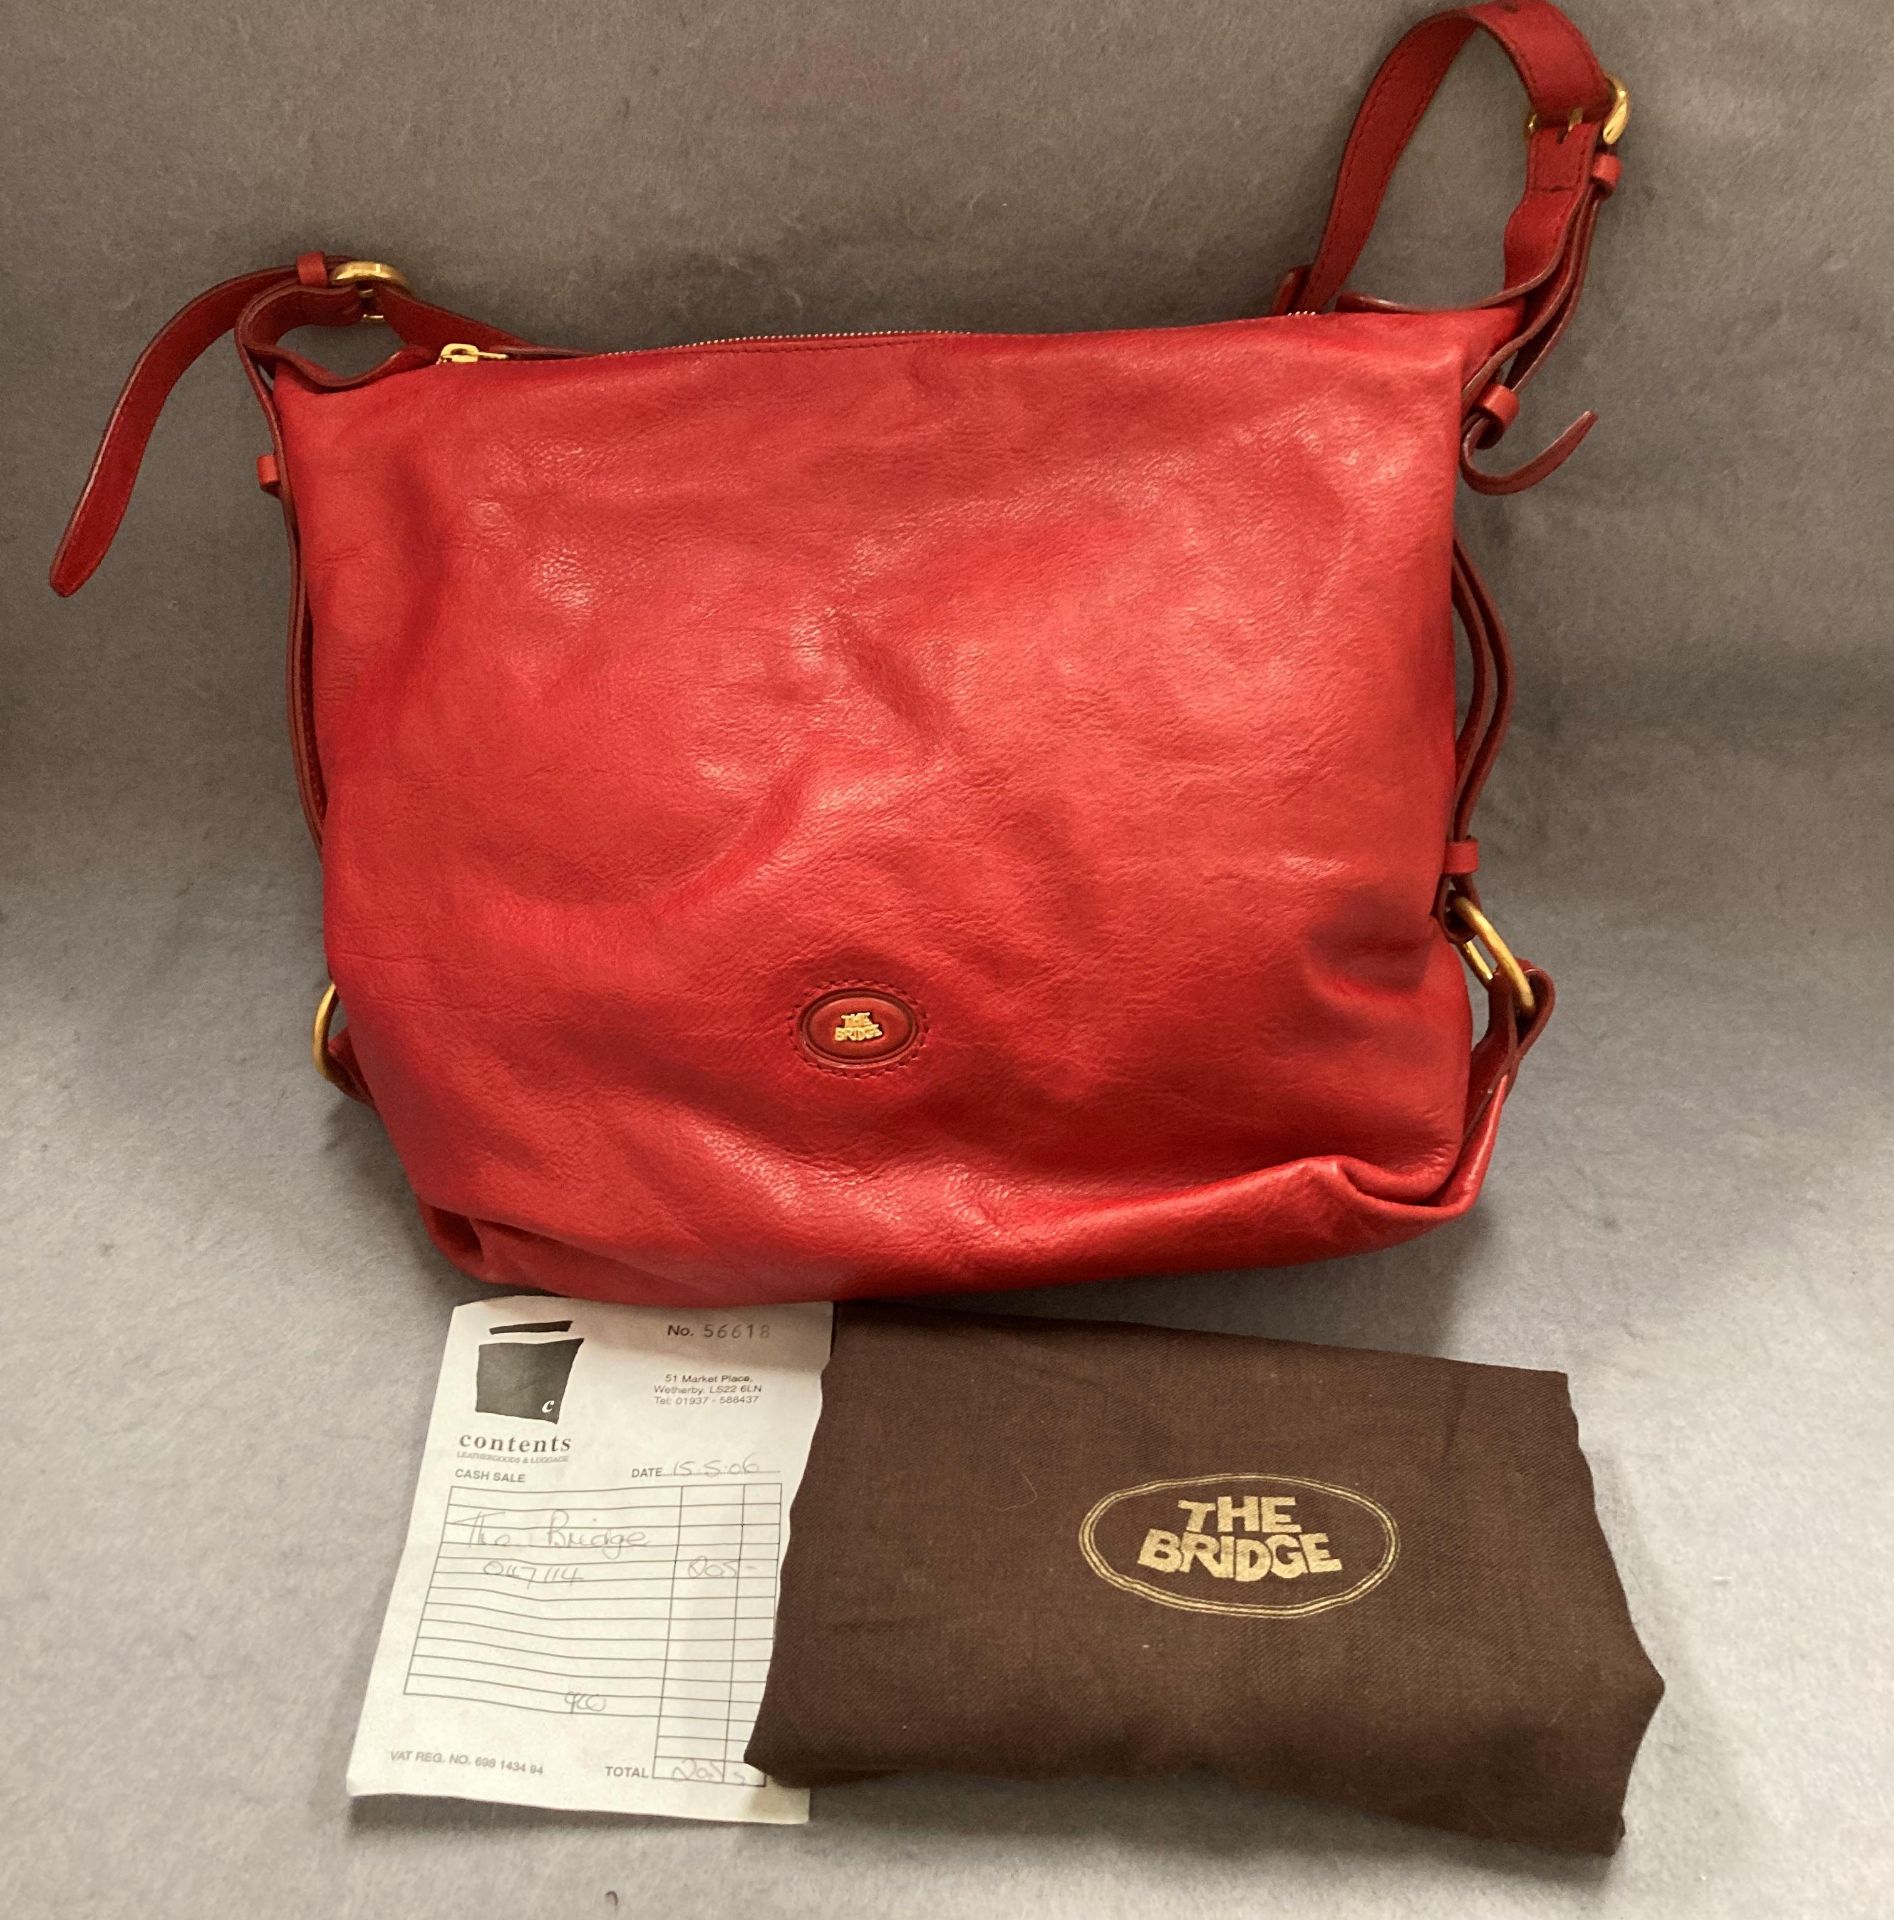 The Bridge red leather bag with protective bag original retail price £205